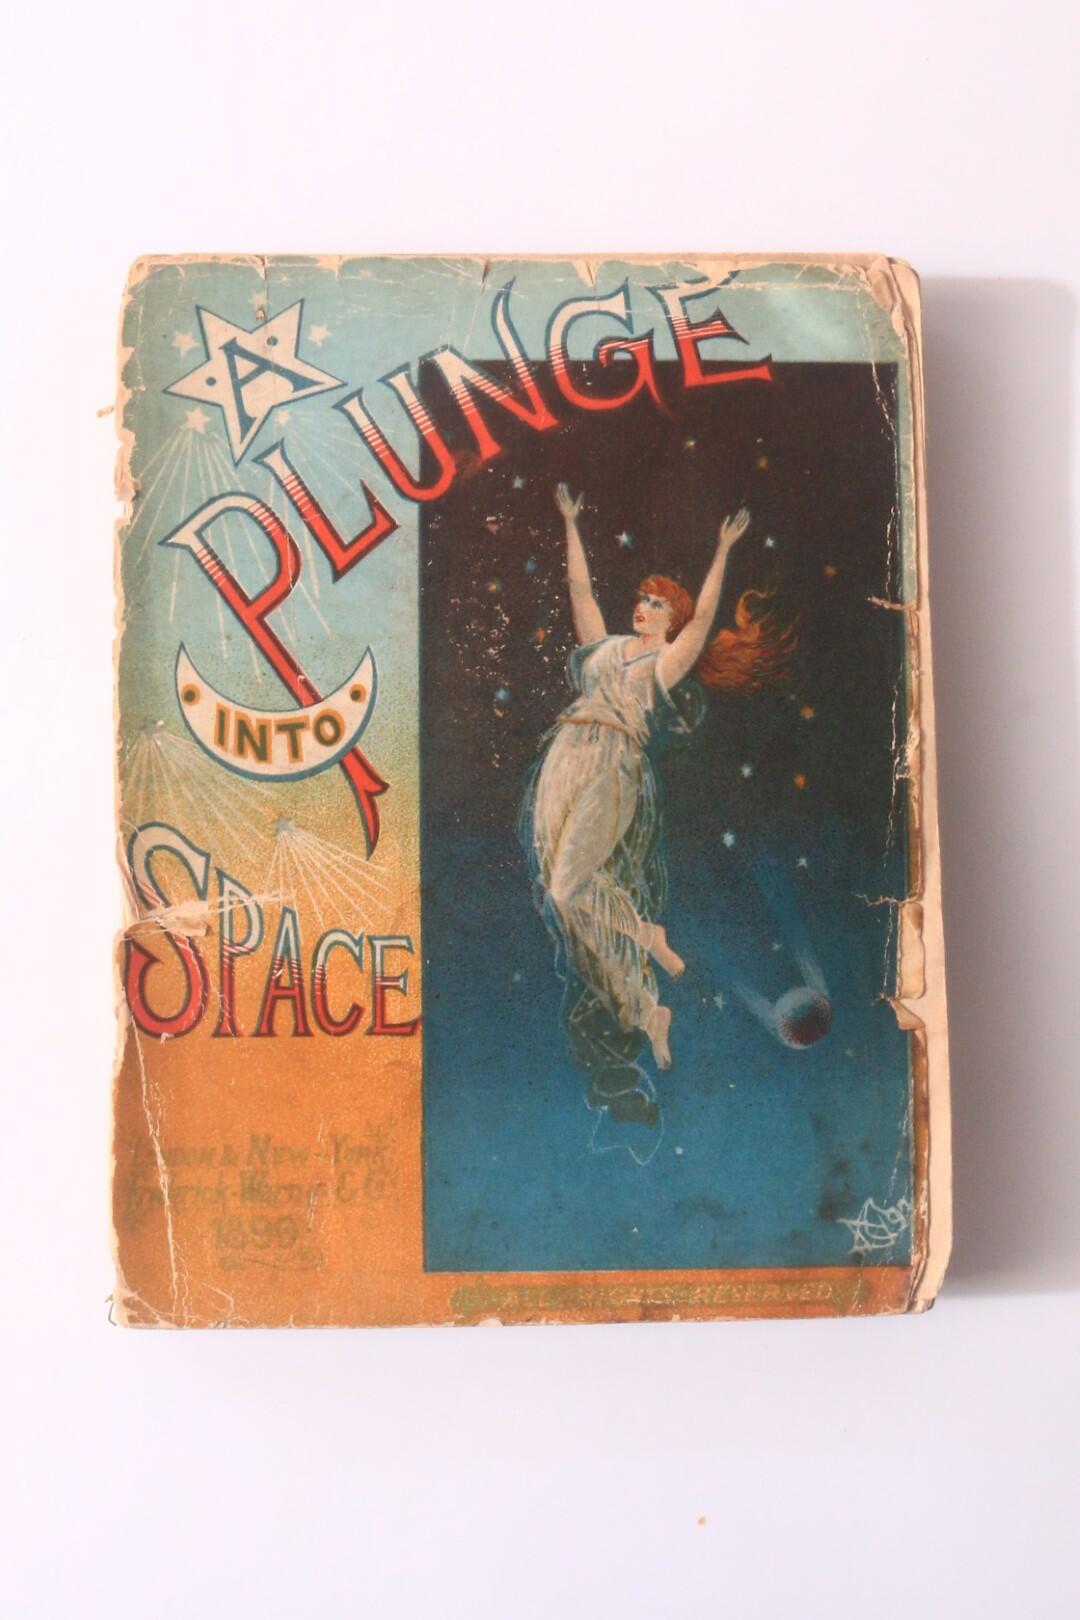 Robert Cromie - A Plunge into Space - Warne, 1890, First Edition.